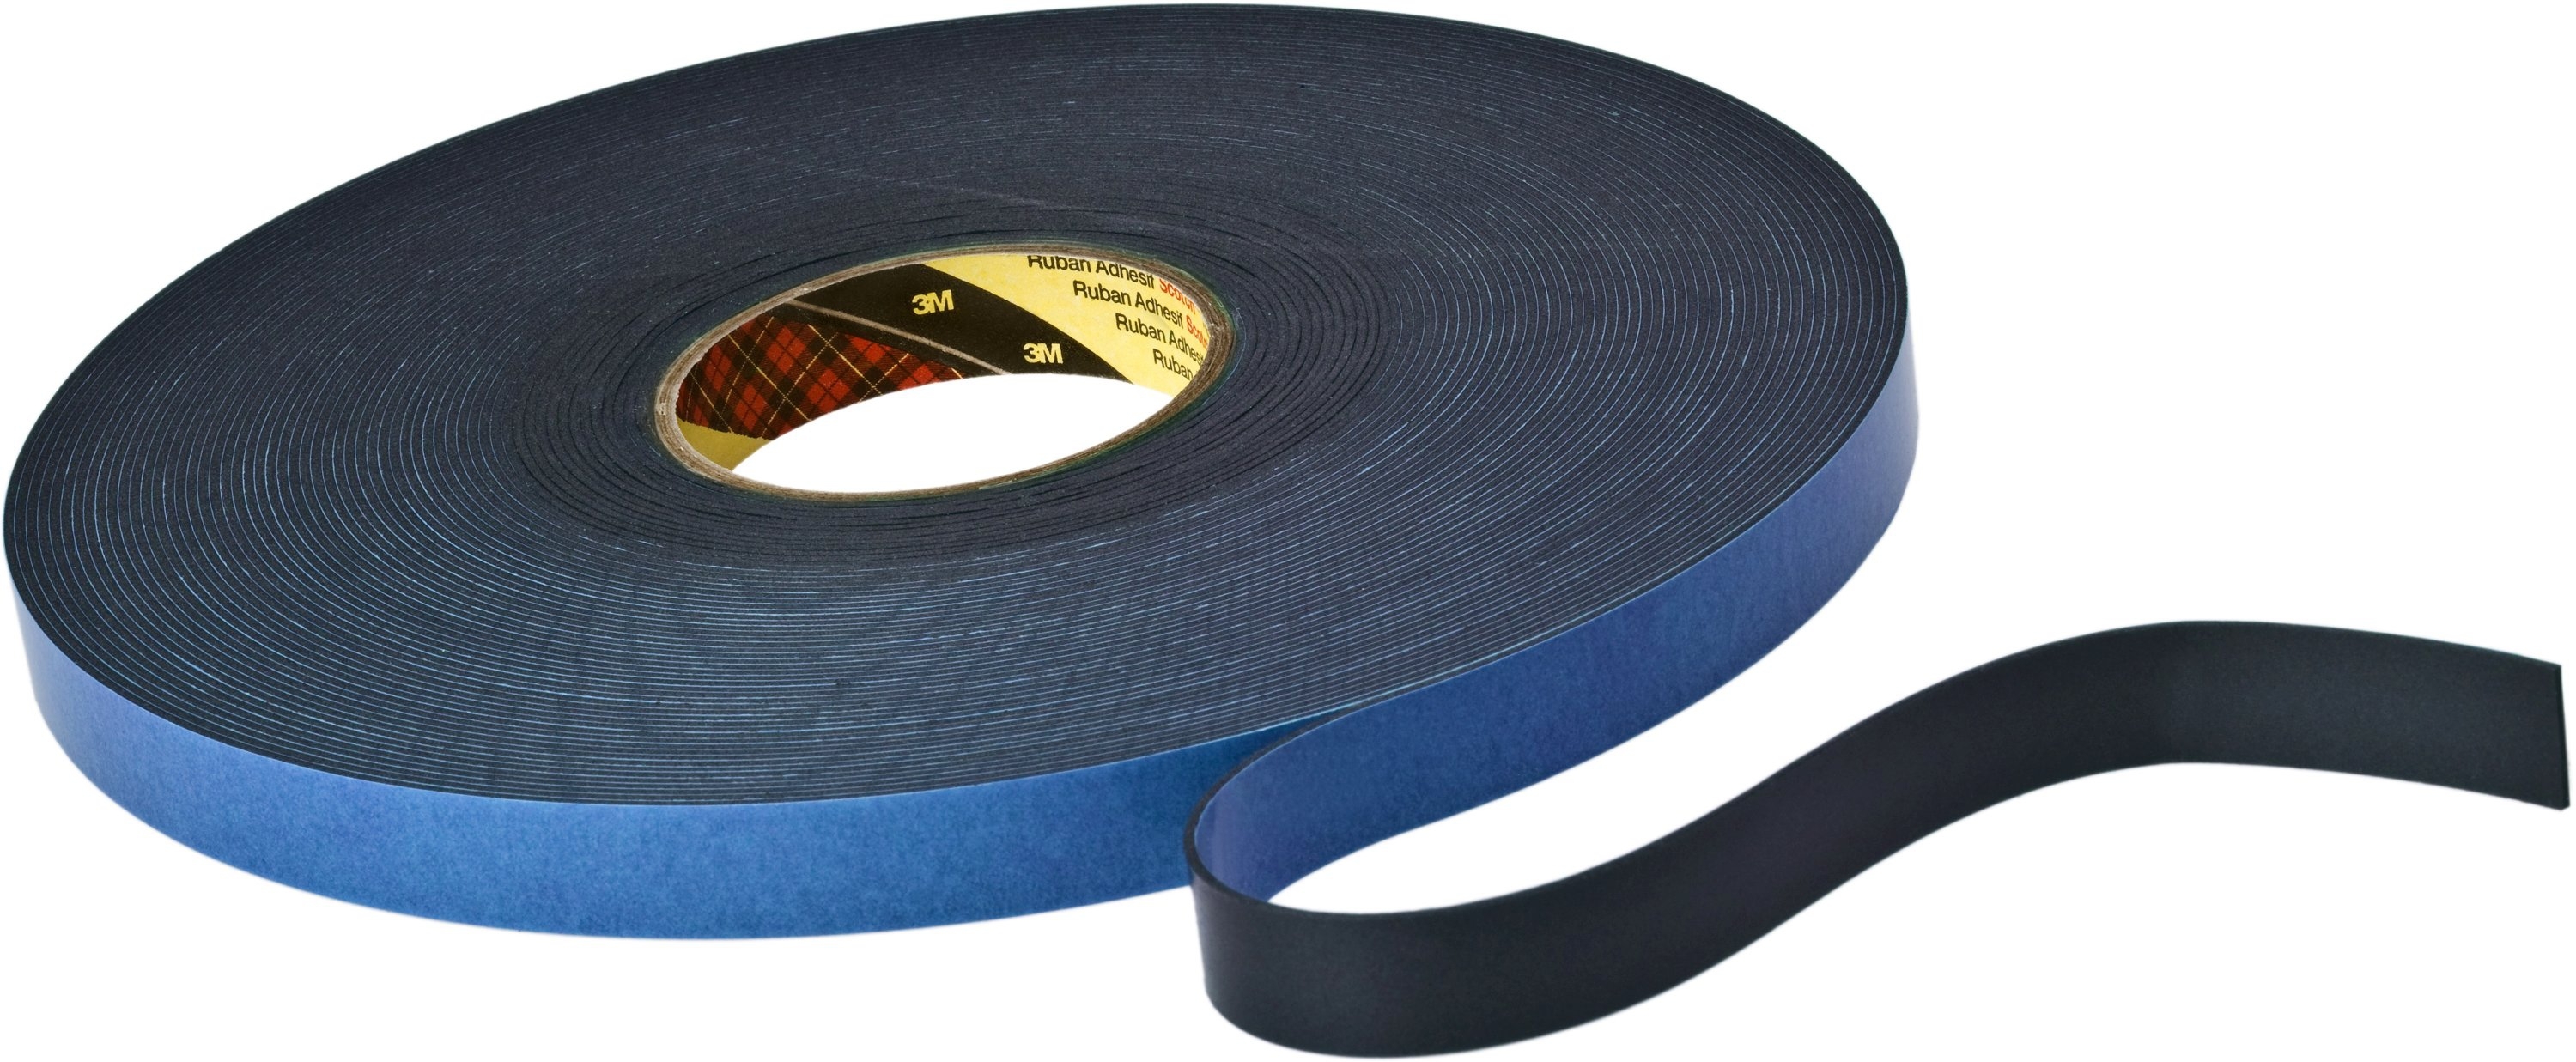 3M Double-sided PE foam tape with acrylic adhesive 9508B, black, 15 mm x 66 m, 0.8 mm